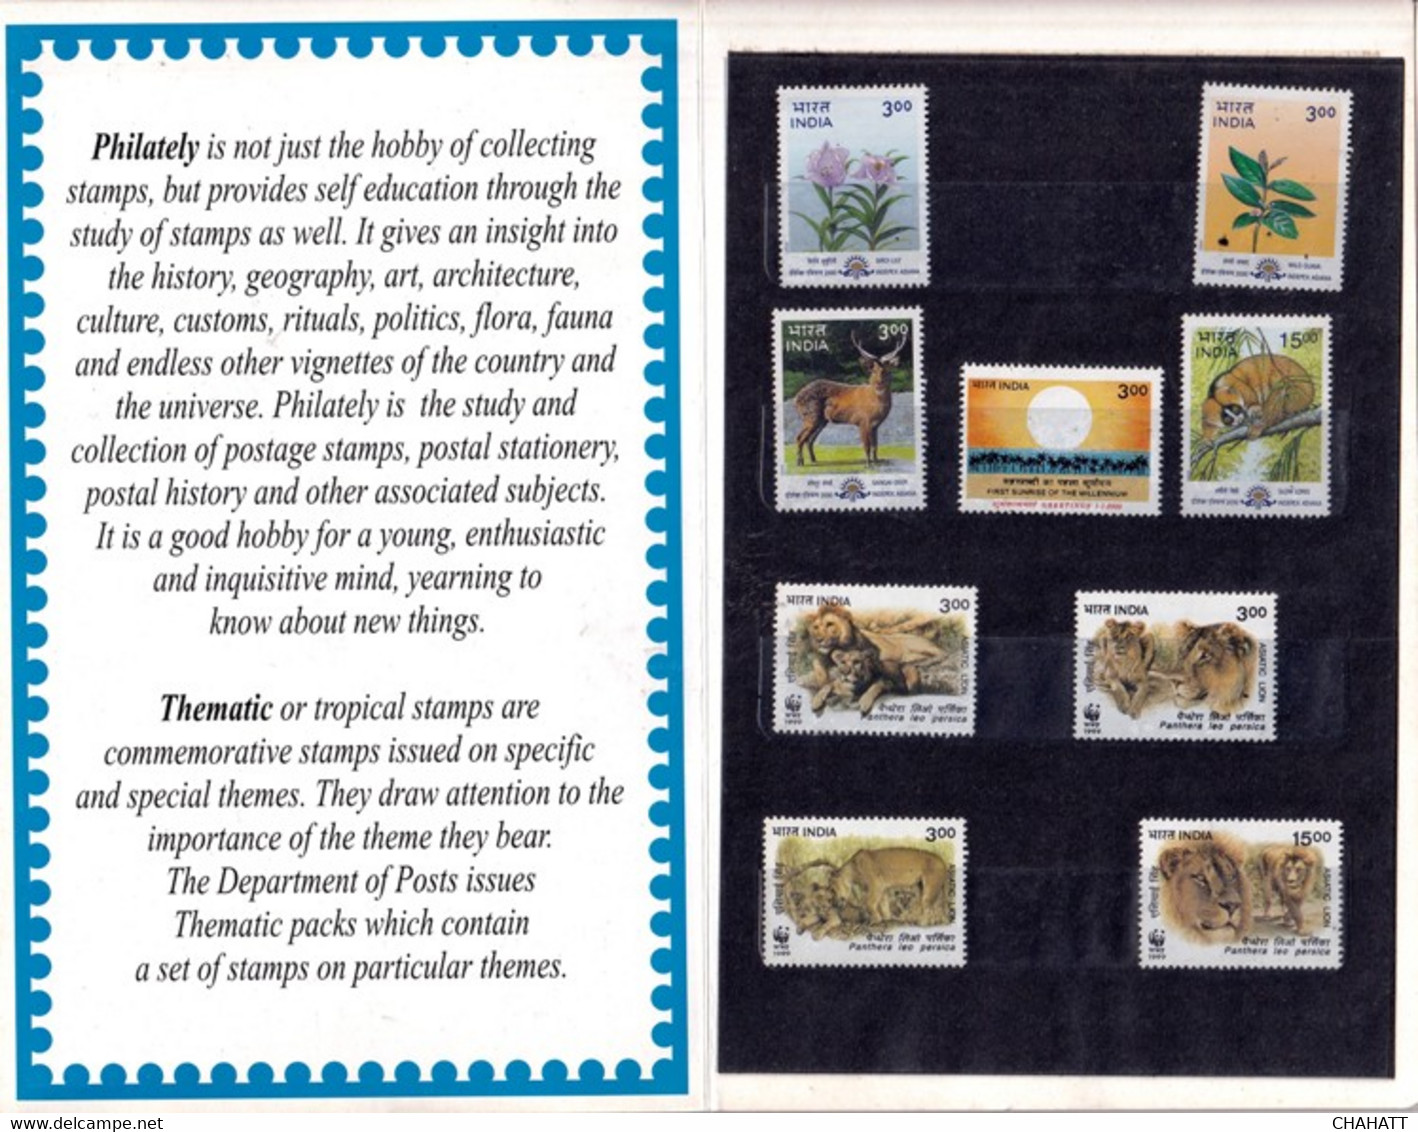 ASIATIC LIONS- WILD LIFE- FLOWERS-THEMATIC PACK-1999-MNH-SCARCE-BX2-38 - Collezioni & Lotti